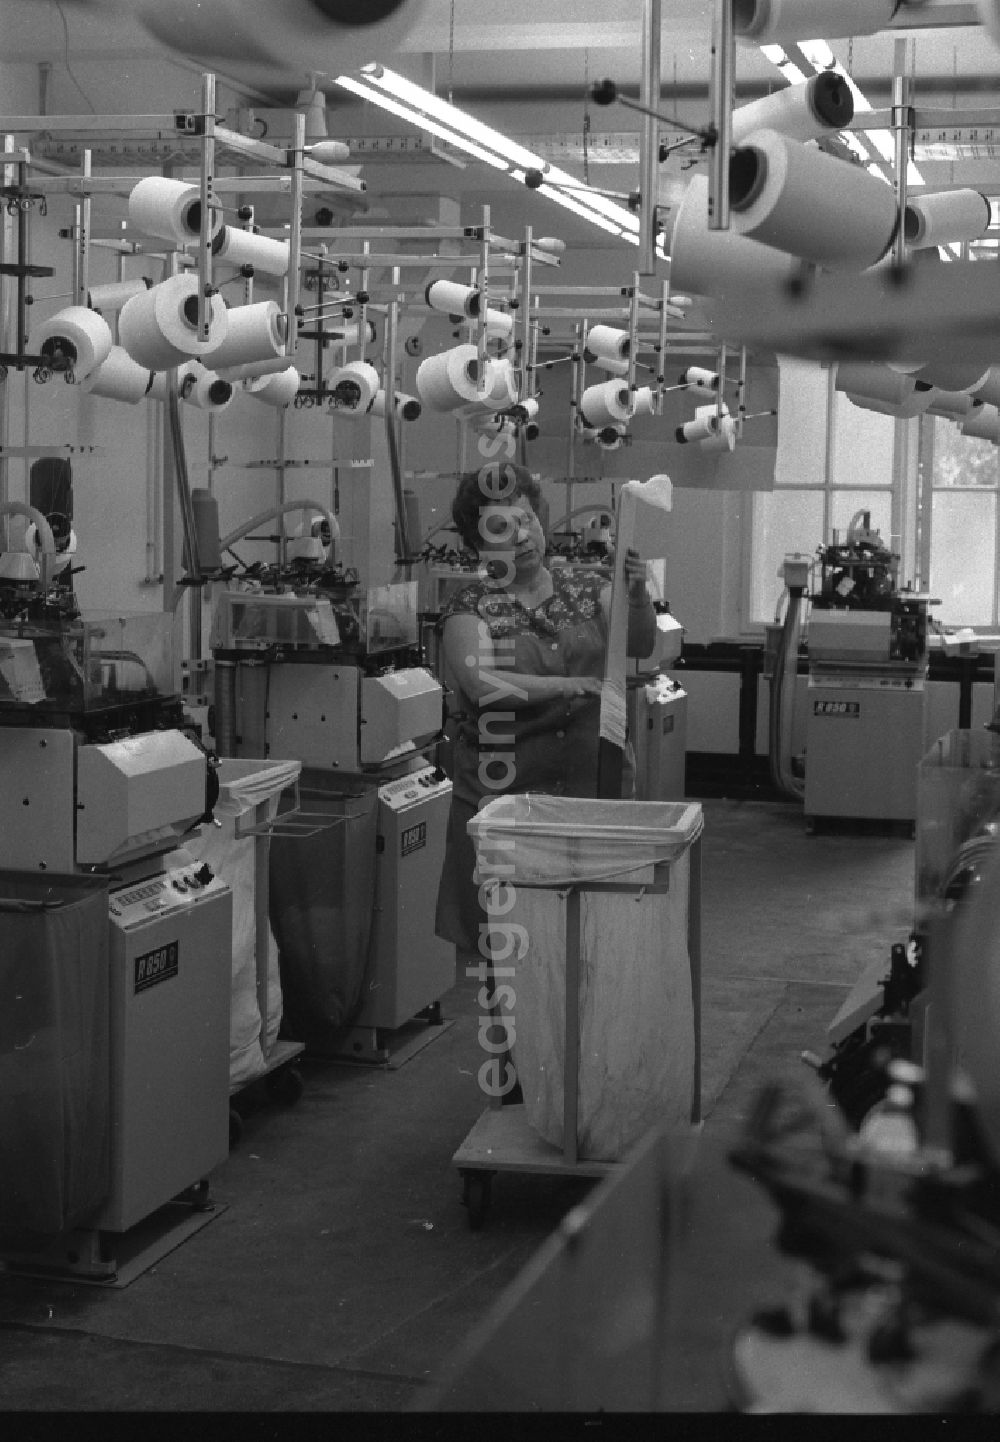 Thalheim: Workplace and factory equipment in the women's factory in the manufacture of women's stockings at the VEB Feinsstockings factory Esda in Thalheim in the Ore Mountains in the state of Saxony on the territory of the former GDR, German Democratic Republic